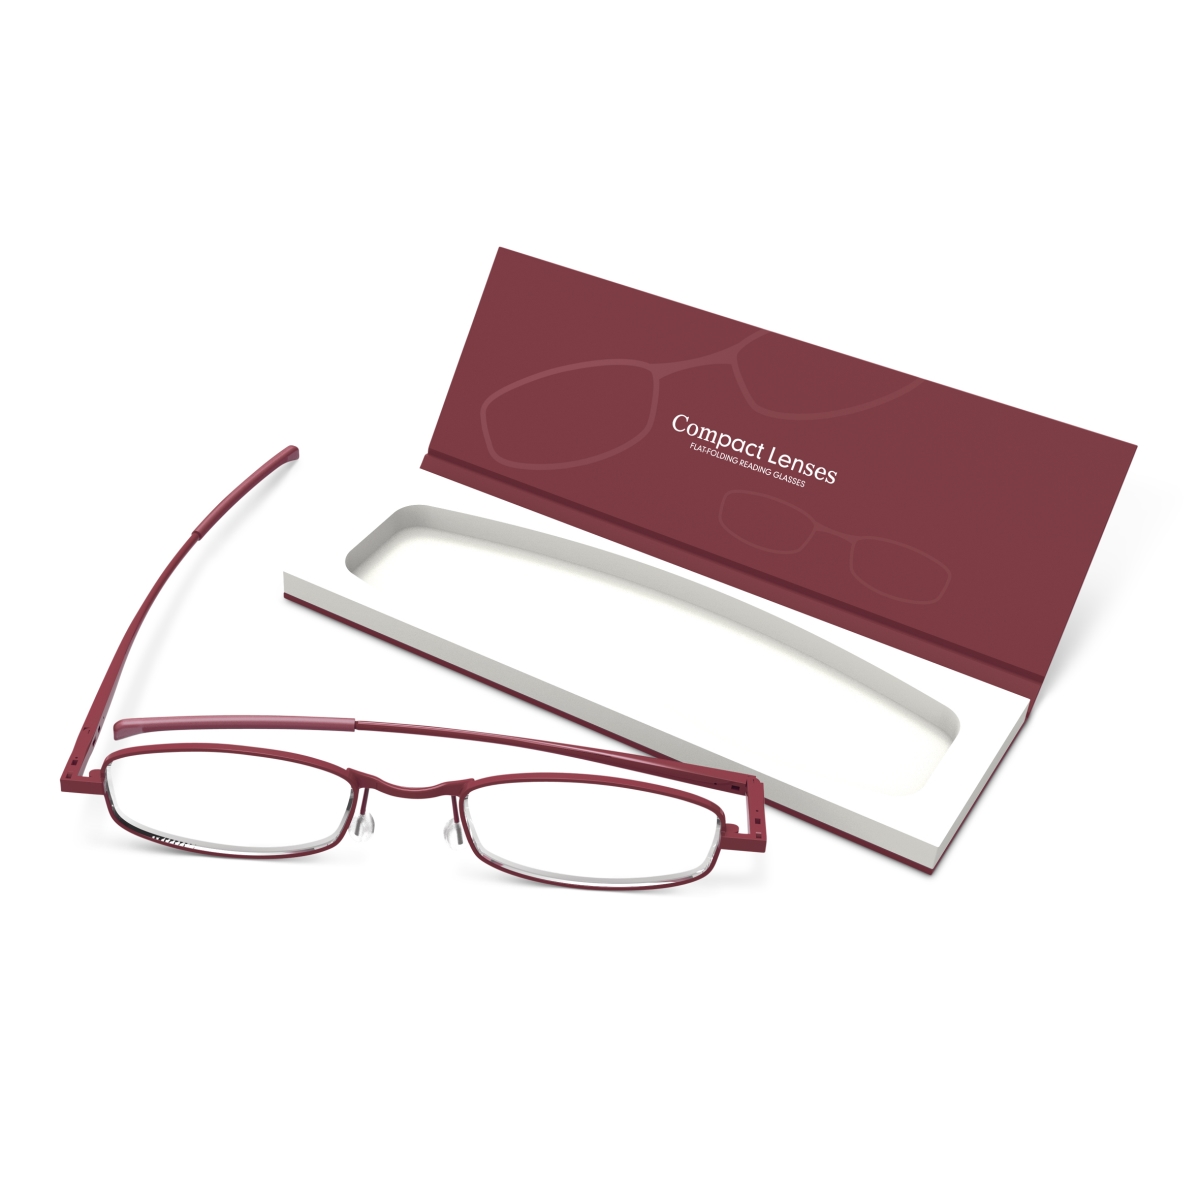 Picture of If USA 91735 Compact Lens Flat Folding Reading Glasses, Port - Plus 3.0